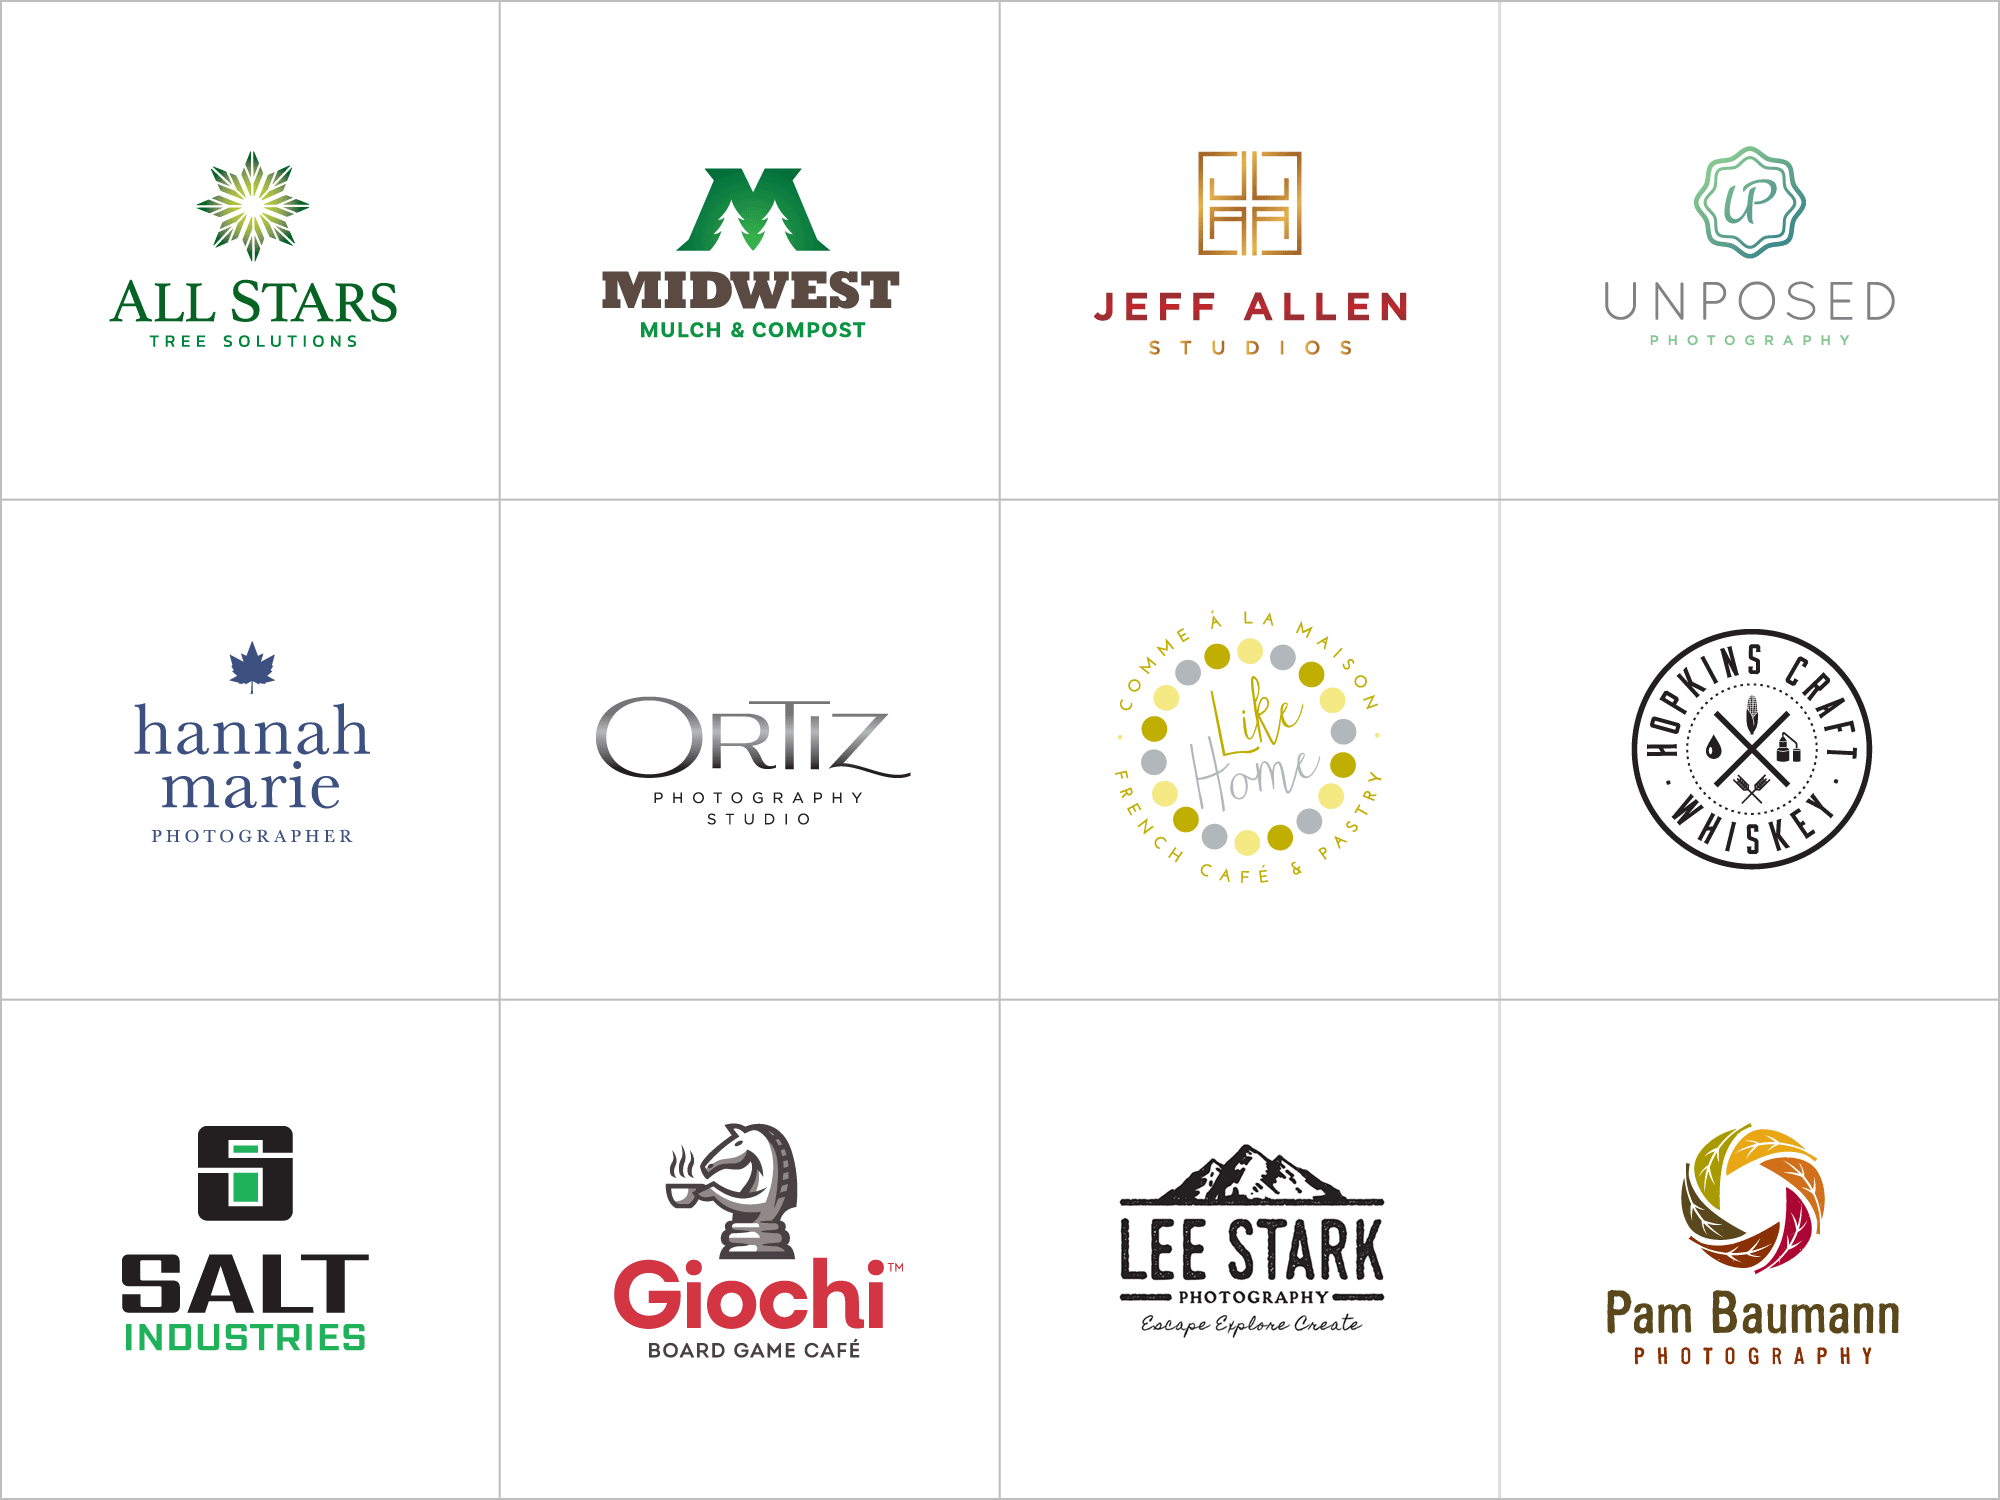 Our client's final logo selections